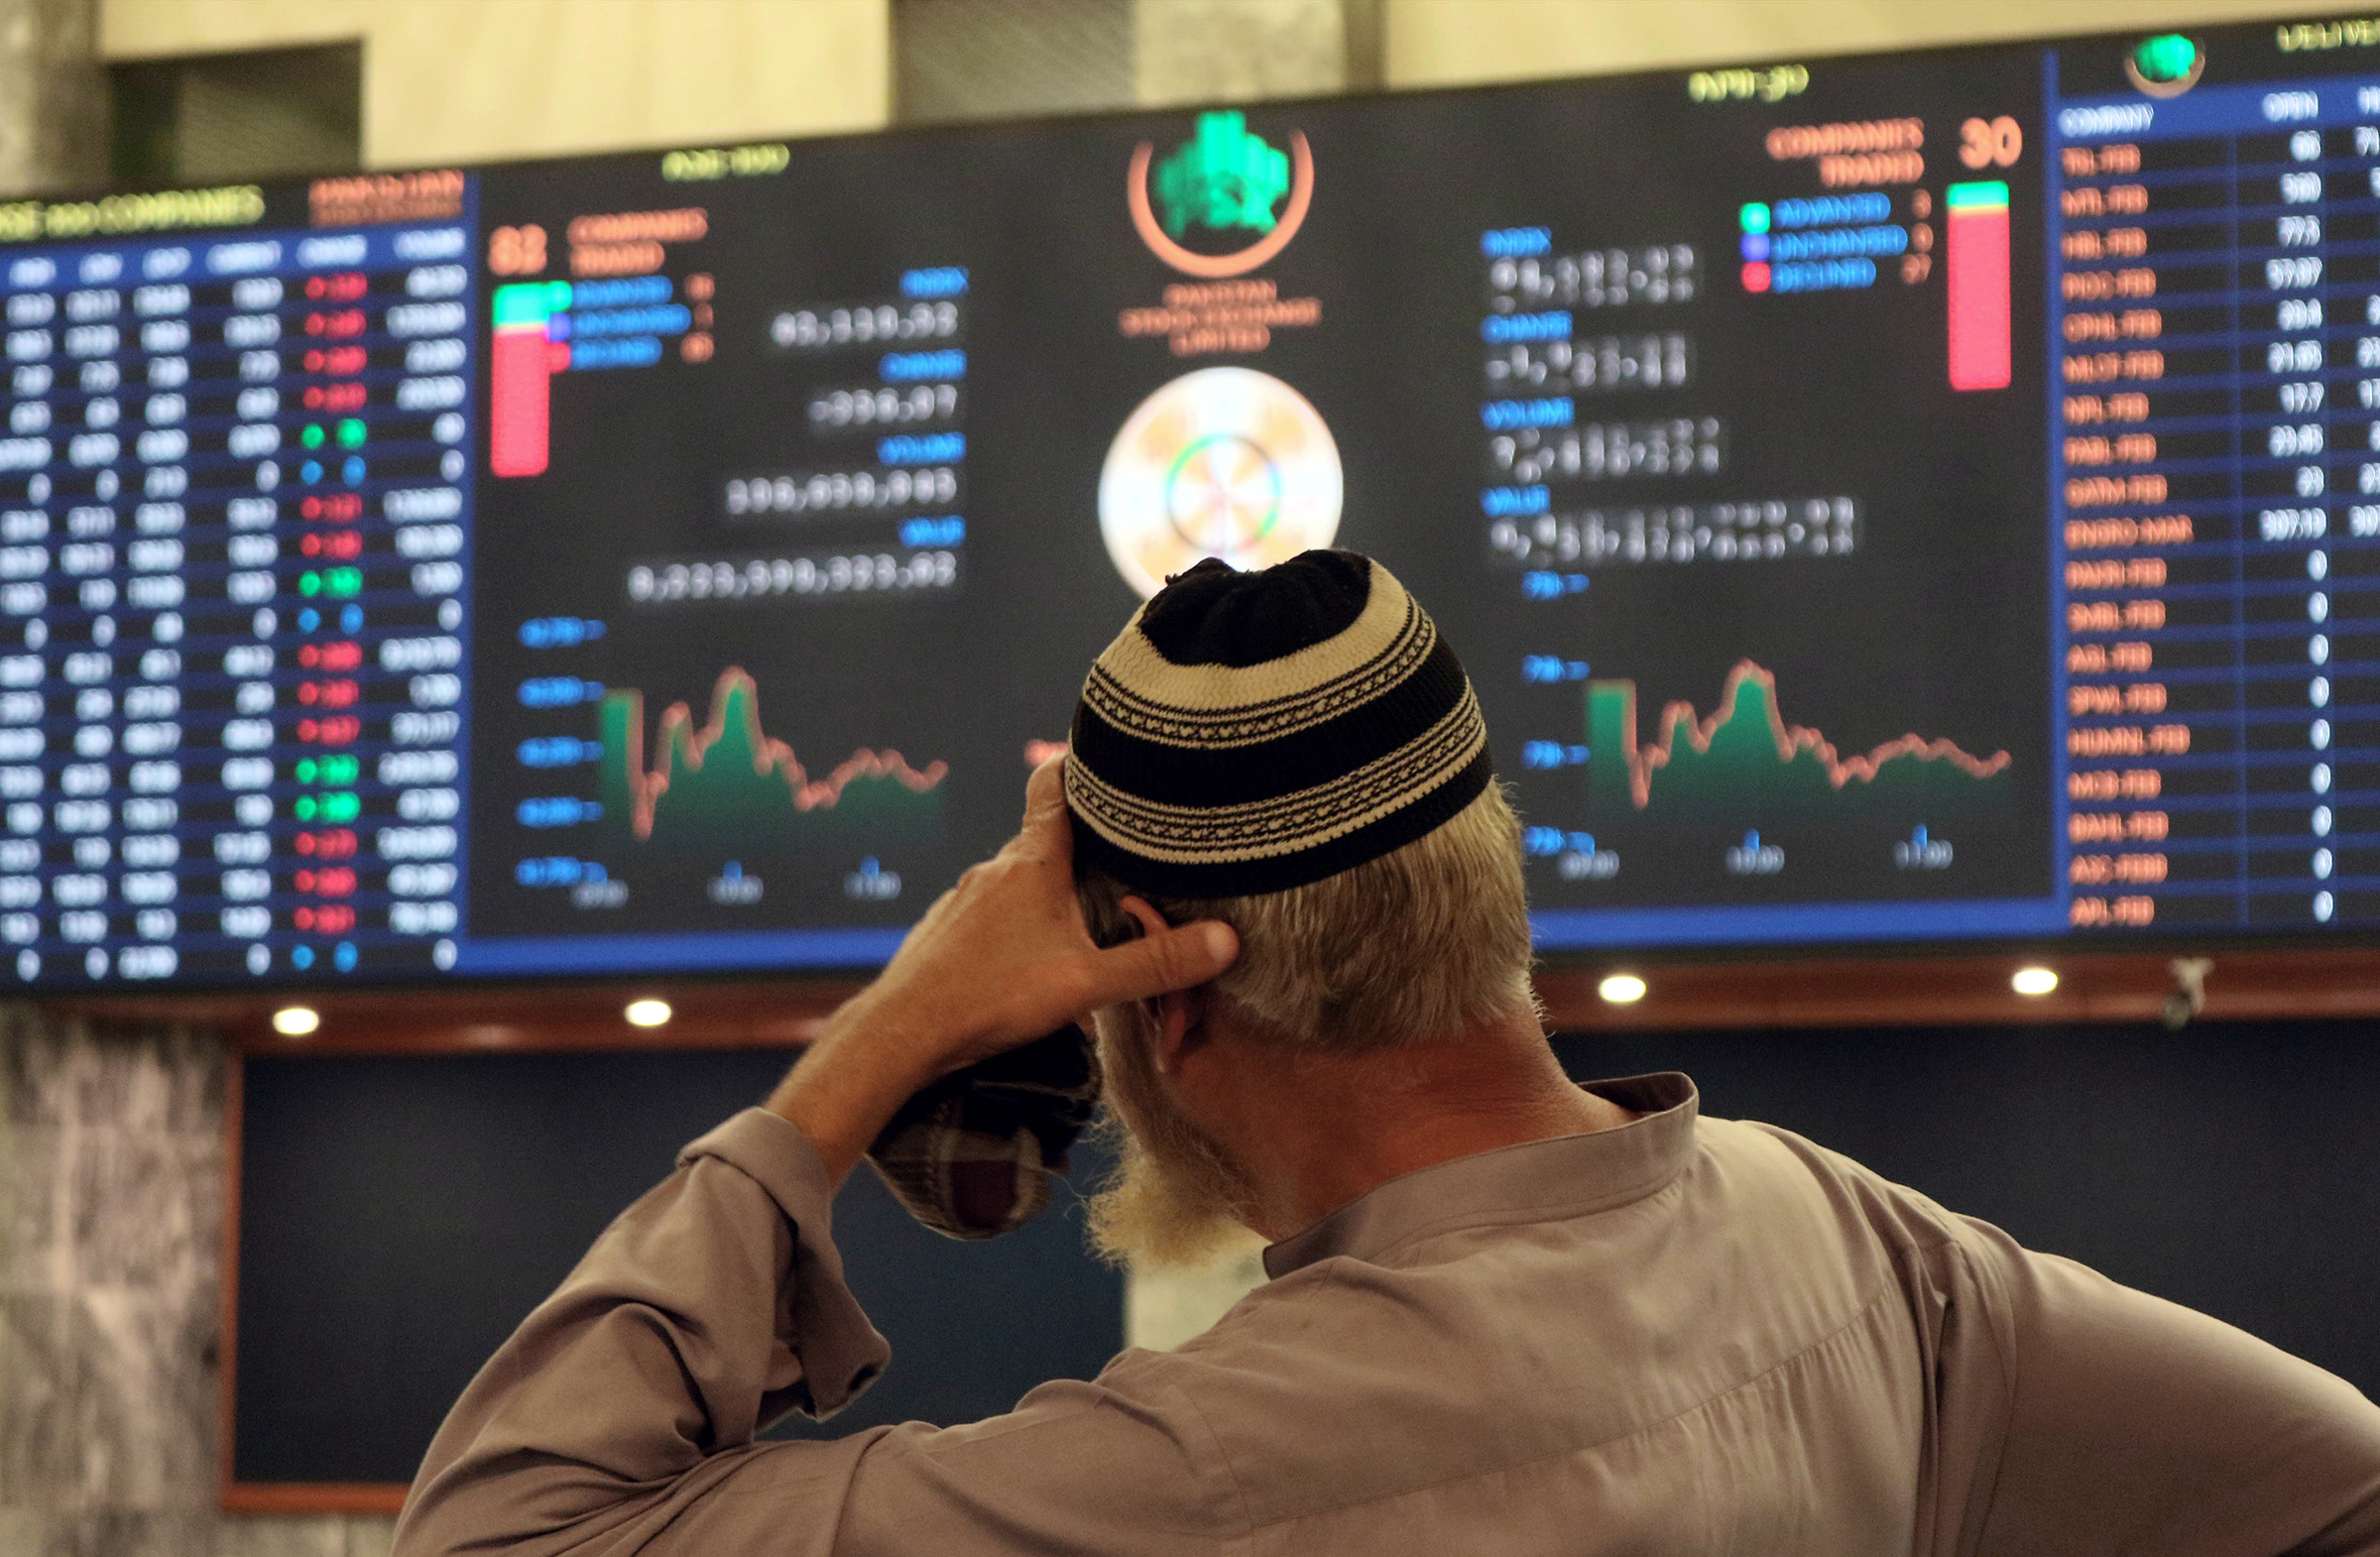 A Pakistani stockbroker monitors the latest share prices during a trading session at the Pakistan Stock Exchange in Karachi, Pakistan, on Feb. 10. The sluggish performance of the market was attributed to the delay in concluding the ninth review of a $7 billion US dollar IMF loan program. (Rehan Khan—EPA-EFE/Shutterstock)